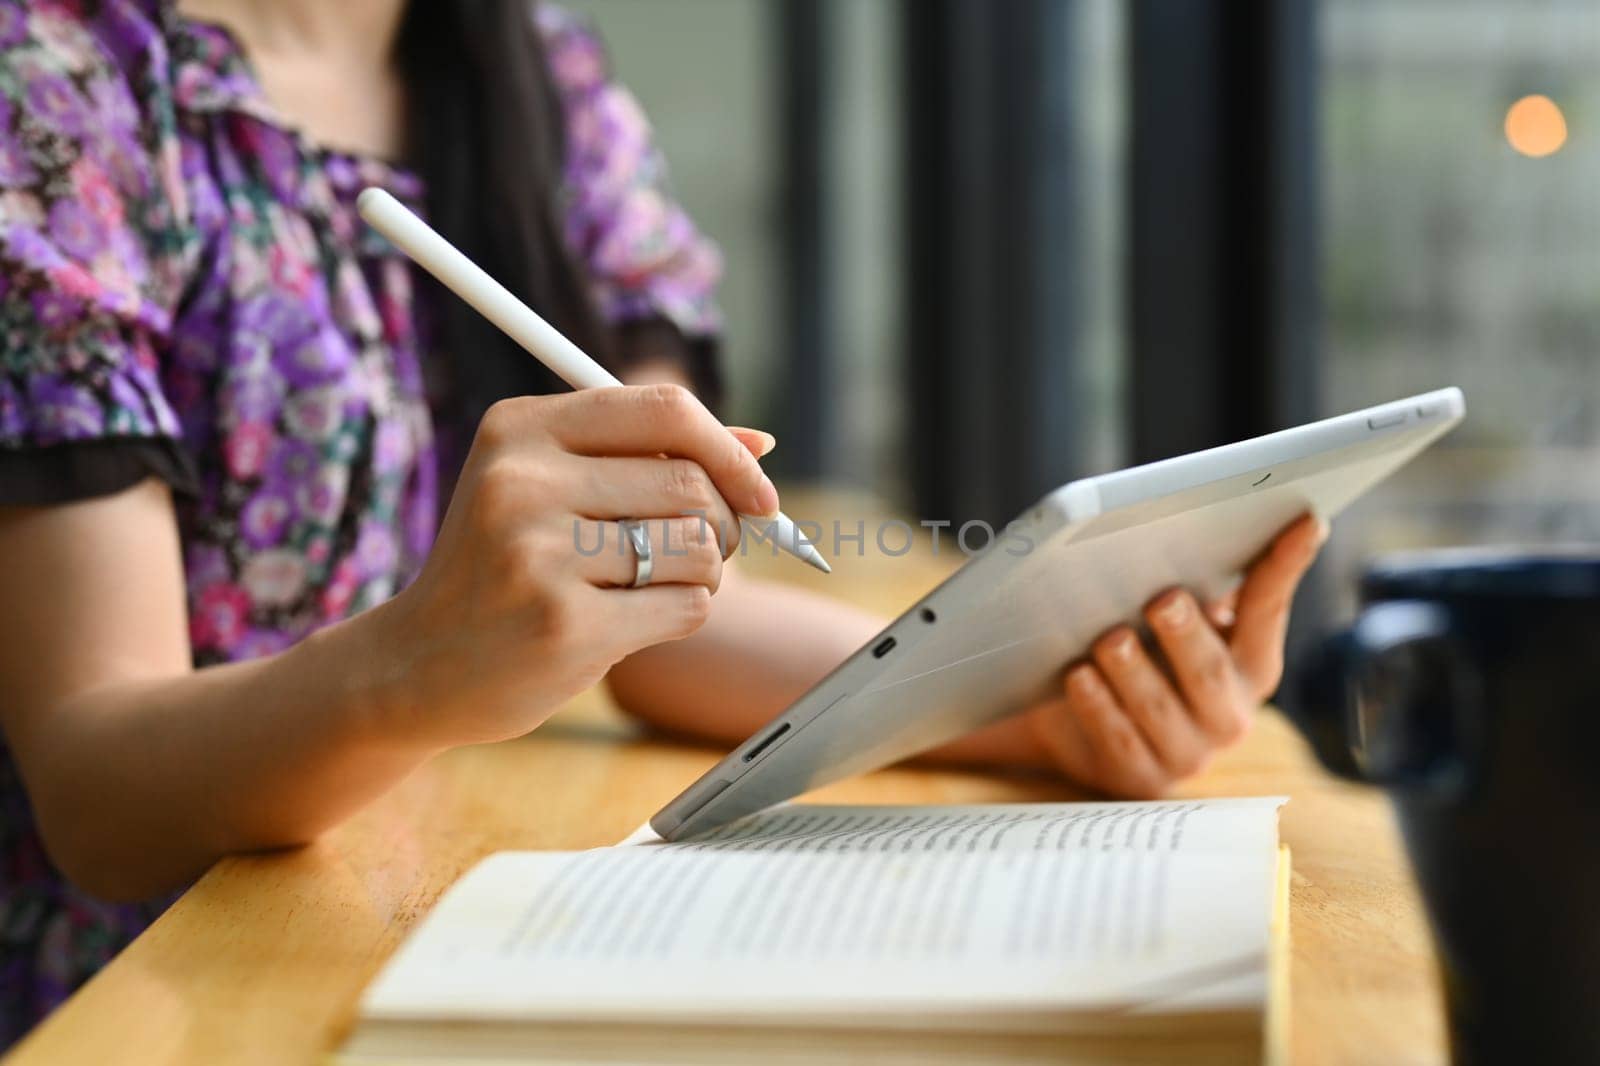 Select on woman hand holding stylus pen and writing notes on digital tablet. People, technology and lifestyle.